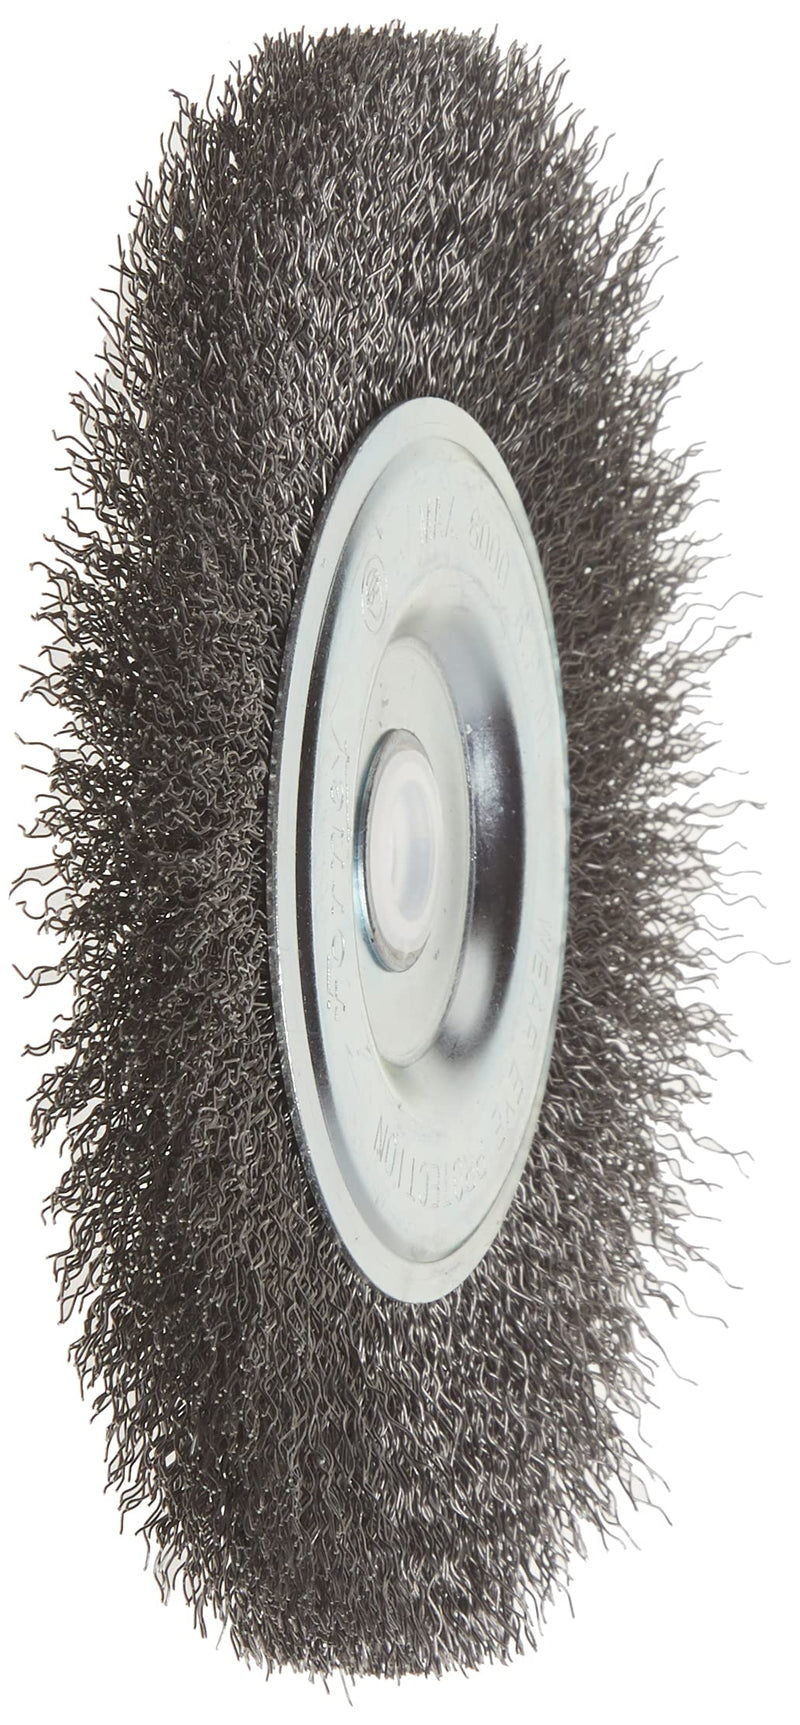 [Australia - AusPower] - Forney 72745 Wire Bench Wheel Brush, Coarse Crimped with 1/2-Inch and 5/8-Inch Arbor, 6-Inch-by-.012-Inch 